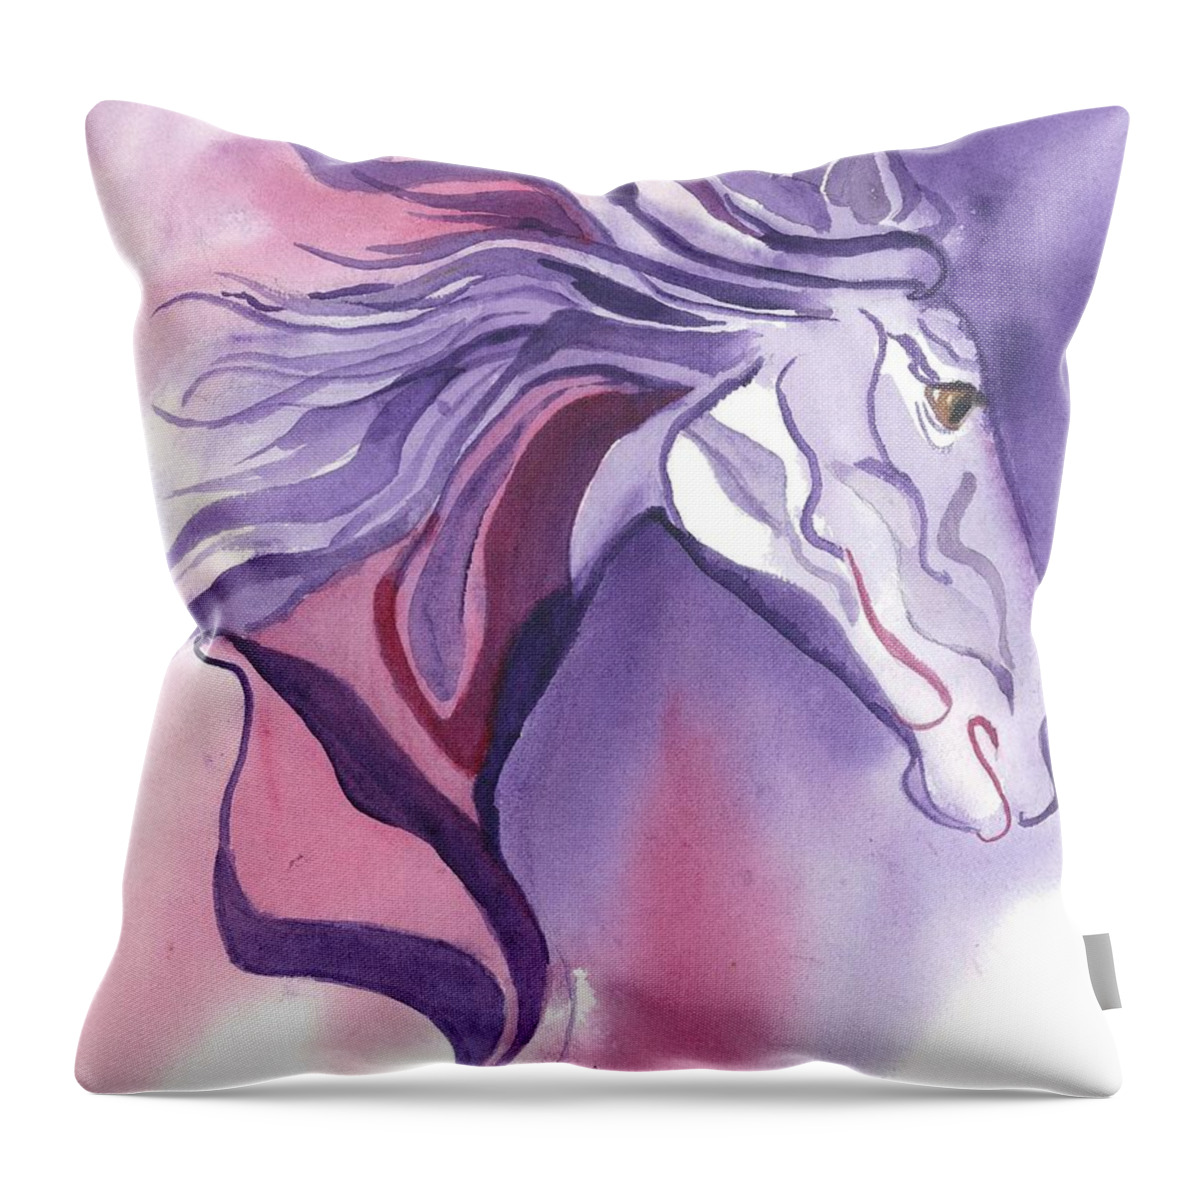 Kid's Art Throw Pillow featuring the painting Running Free by Maria Hunt